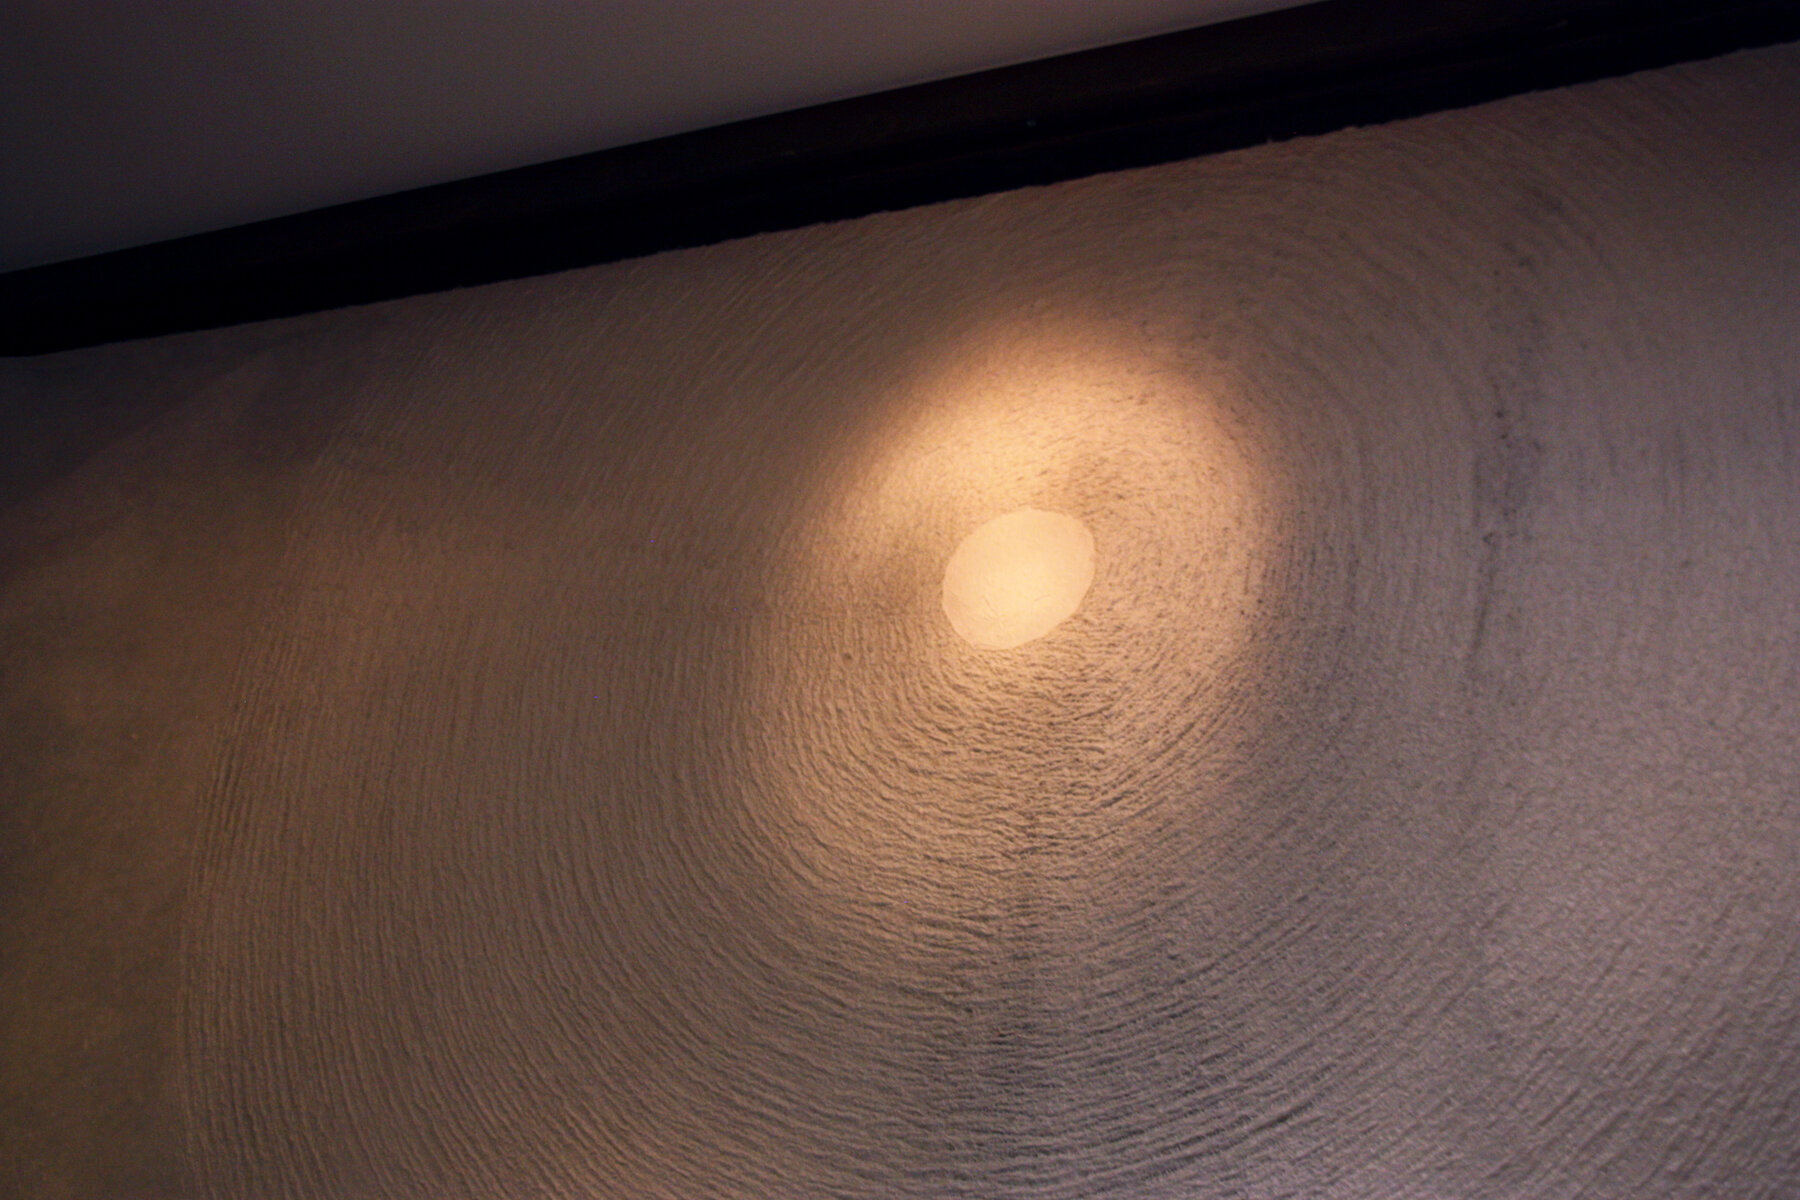    cavern of stars  , 2019 wall section detail  handmade paper (kozo), LED  Gallery Yugen, Kyoto, Japan (renovated storehouse) 